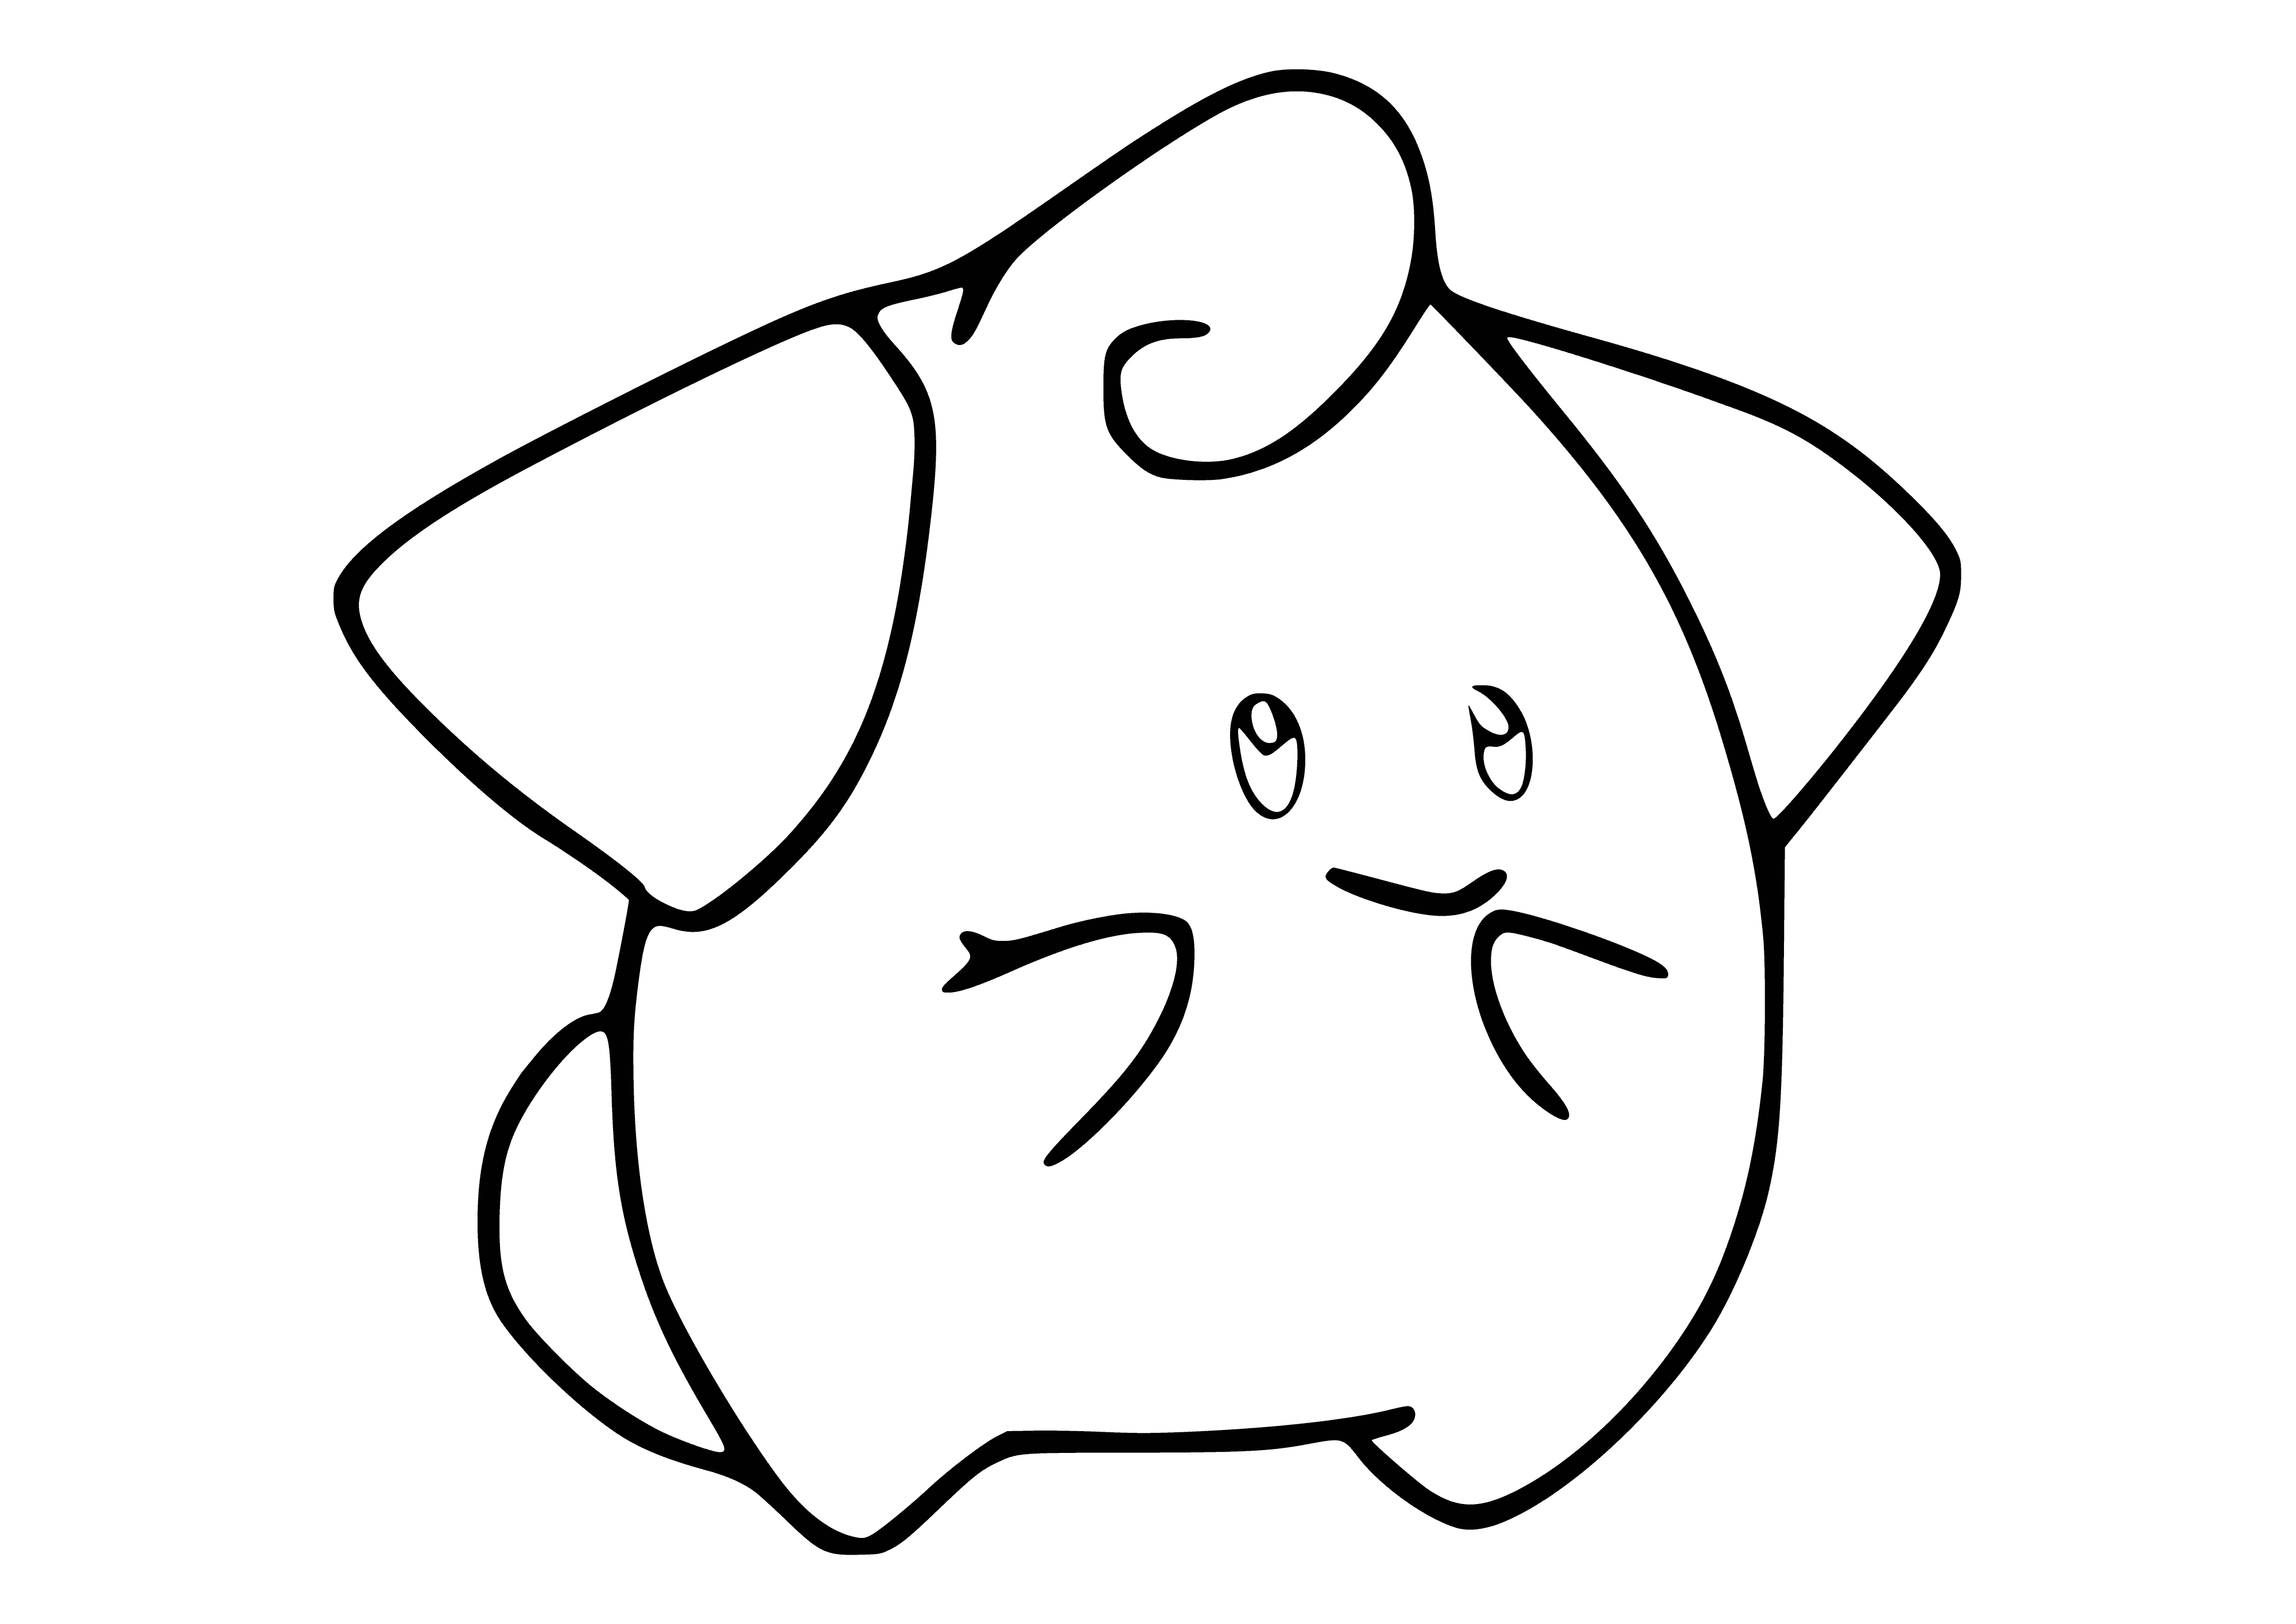 coloring page: Small, white creature w/ black eyes, circular mouth, round body & stubby limbs. Has black tail & evolves into Clefairy. #Pokemon